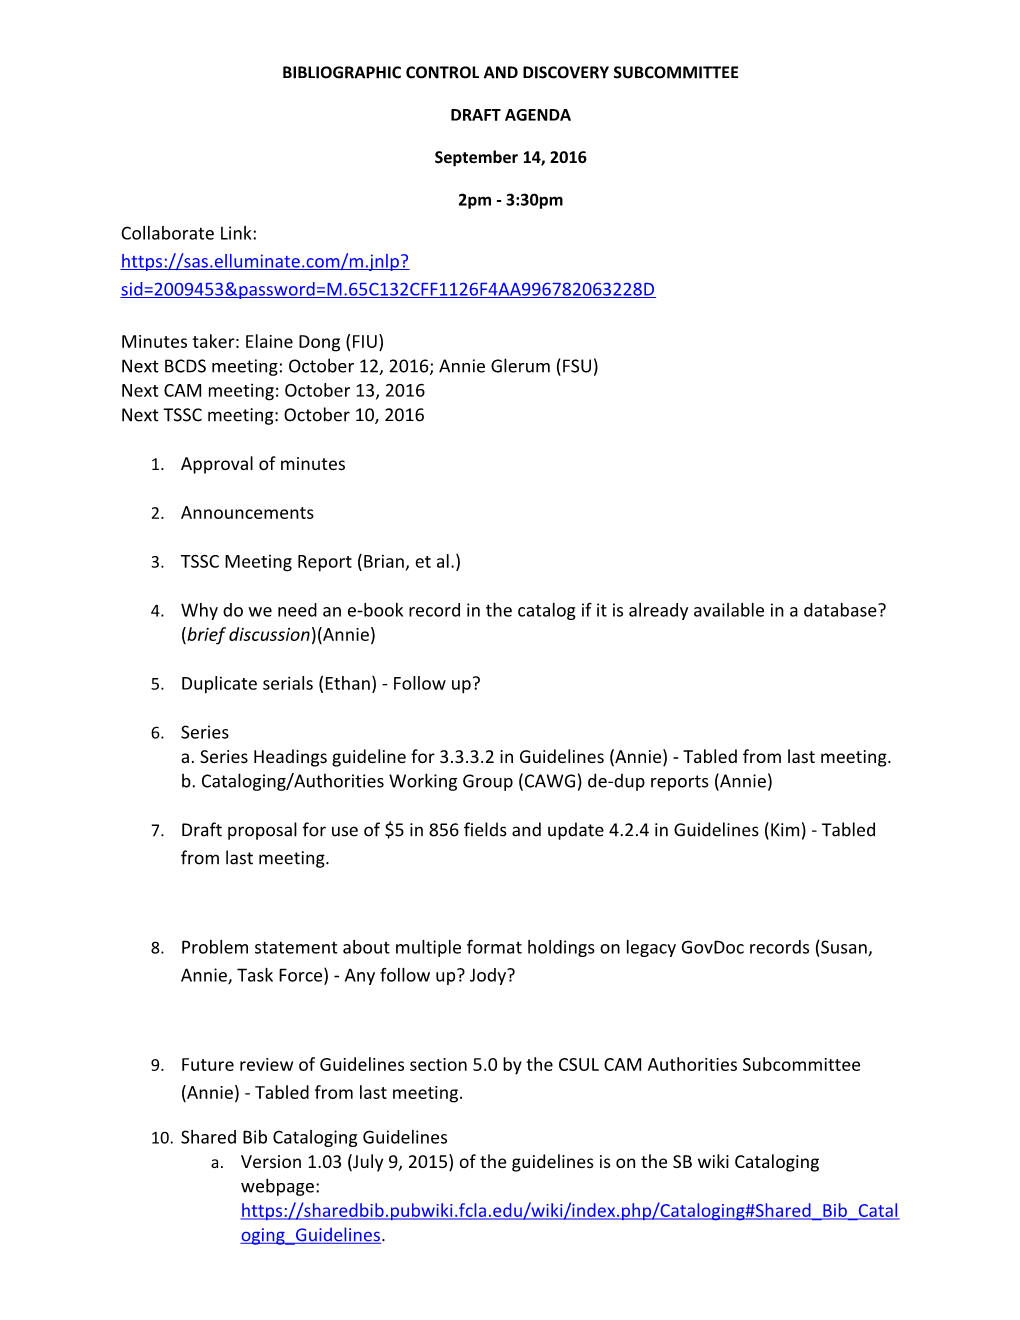 Bibliographic Control and Discovery Subcommittee Agenda